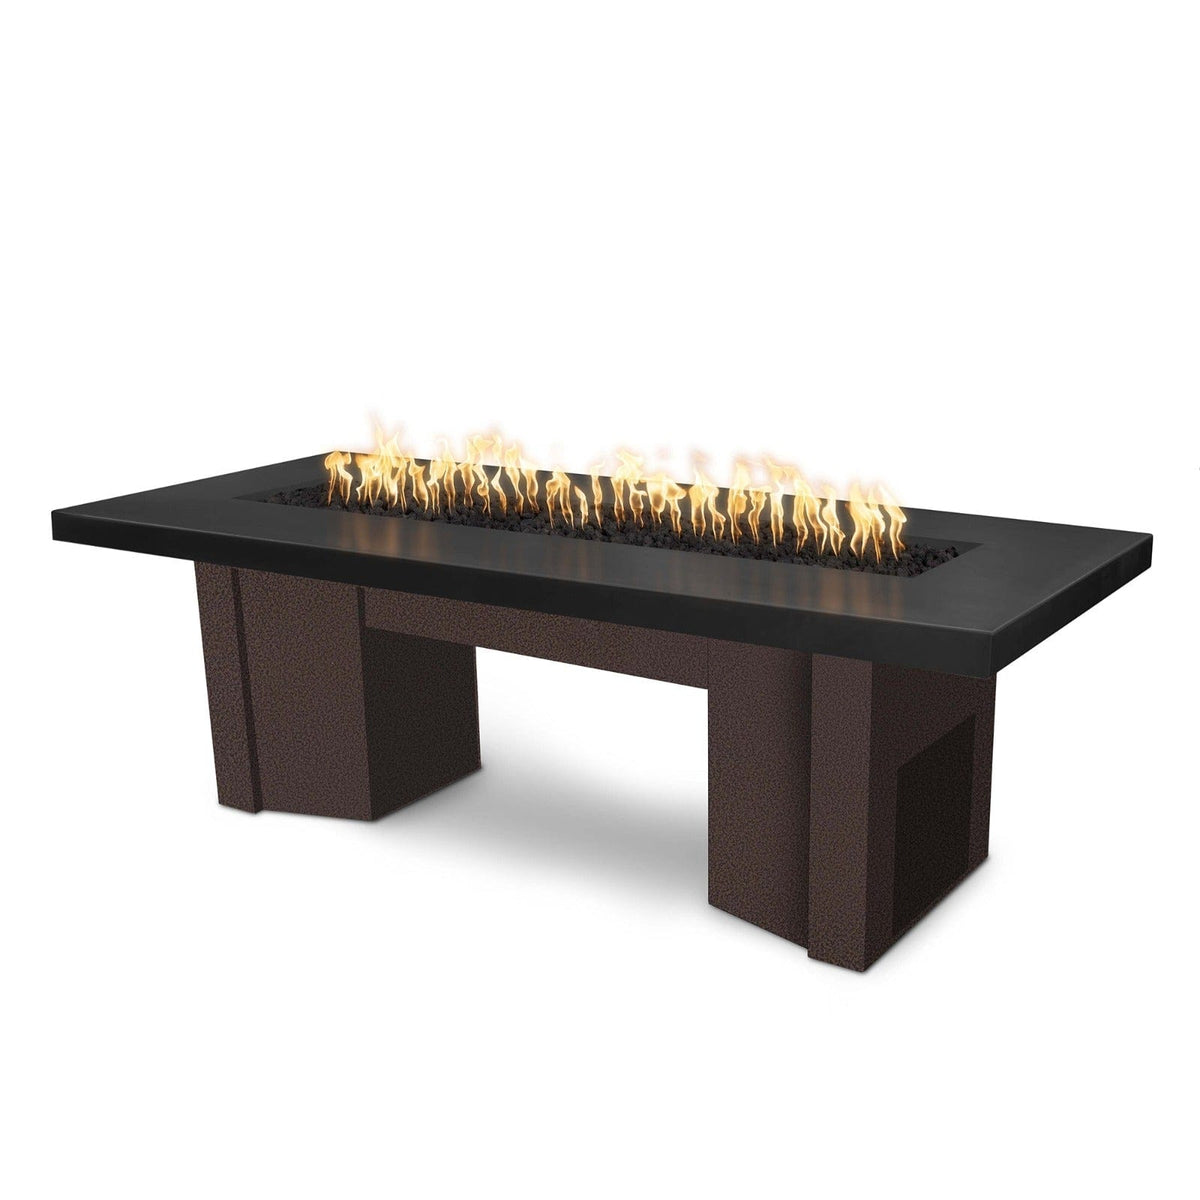 The Outdoor Plus Fire Features Black (-BLK) / Copper Vein Powder Coated Steel (-CPV) The Outdoor Plus 78&quot; Alameda Fire Table Smooth Concrete in Liquid Propane - 110V Plug &amp; Play Electronic Ignition / OPT-ALMGFRC78EKIT-LP